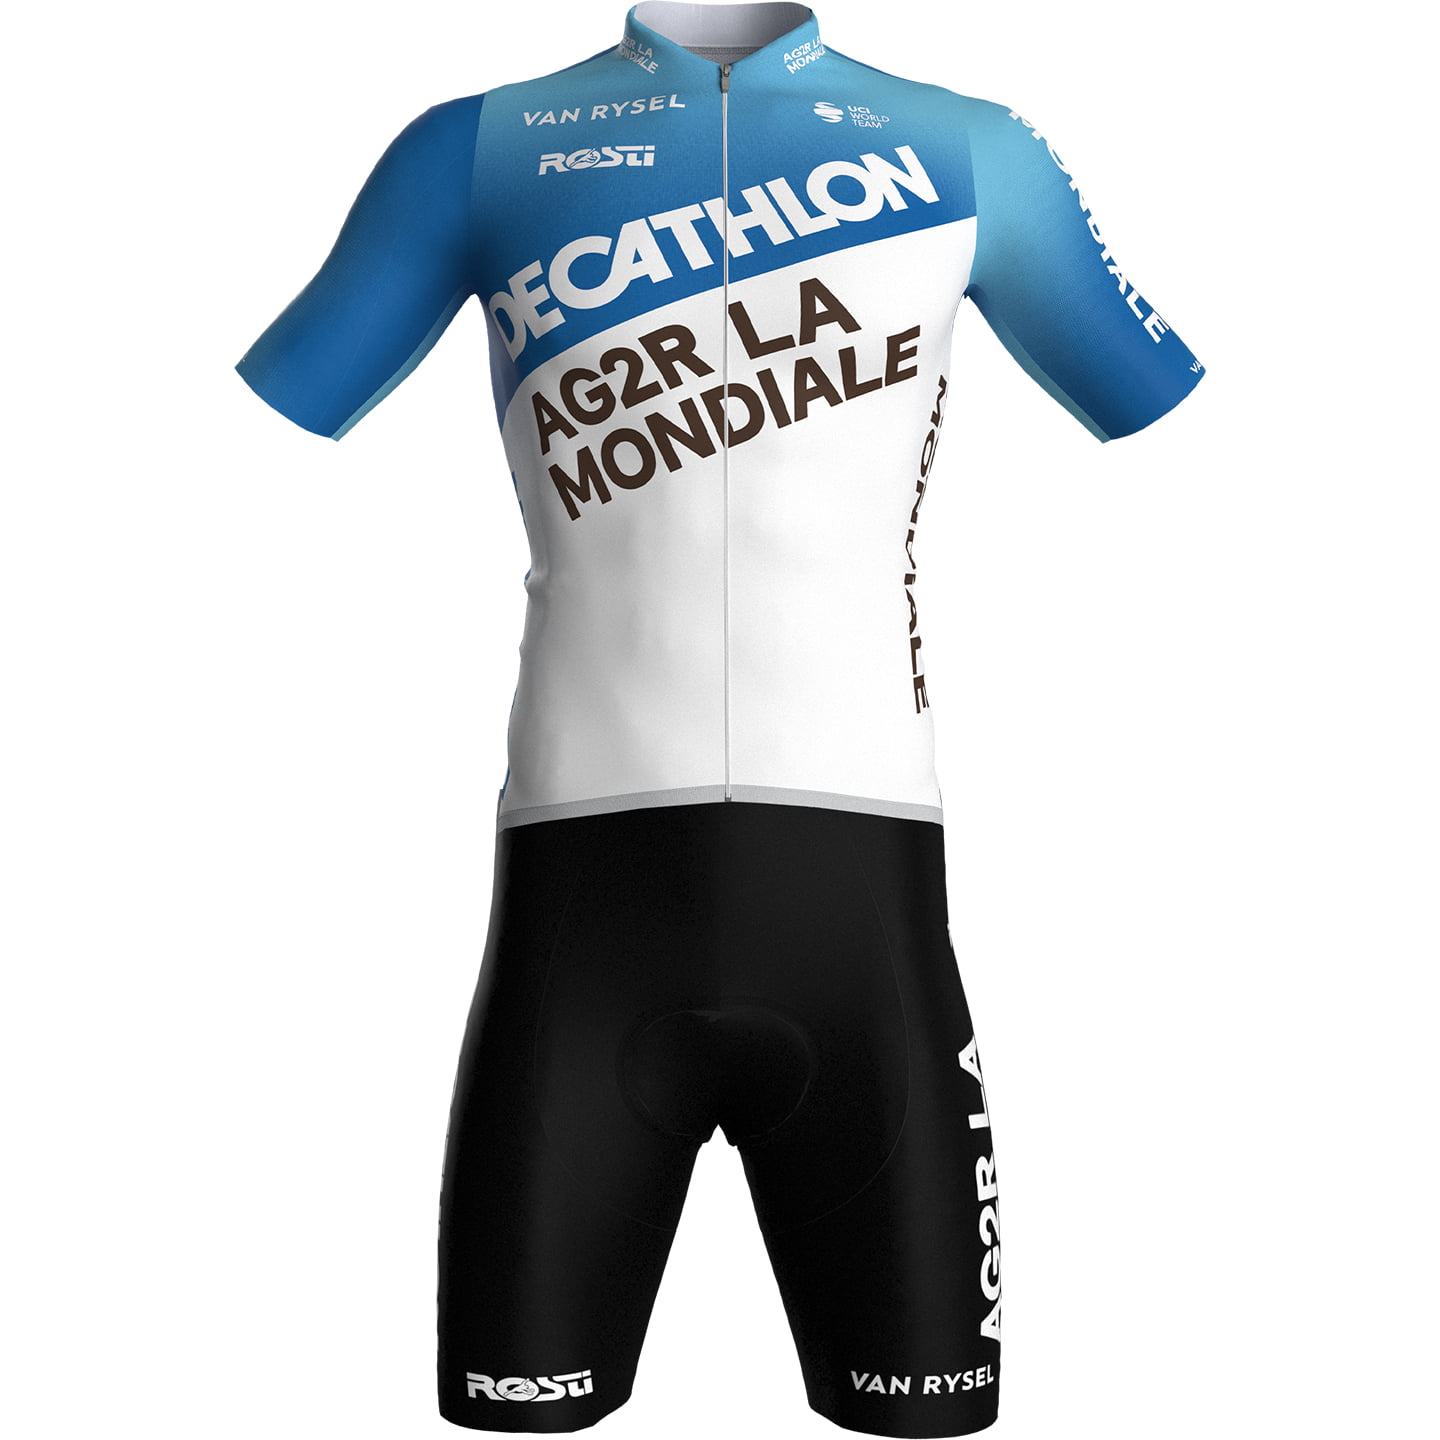 DECATHLON AG2R LA MONDIALE Race 2024 Set (cycling jersey + cycling shorts) Set (2 pieces), for men, Cycling clothing